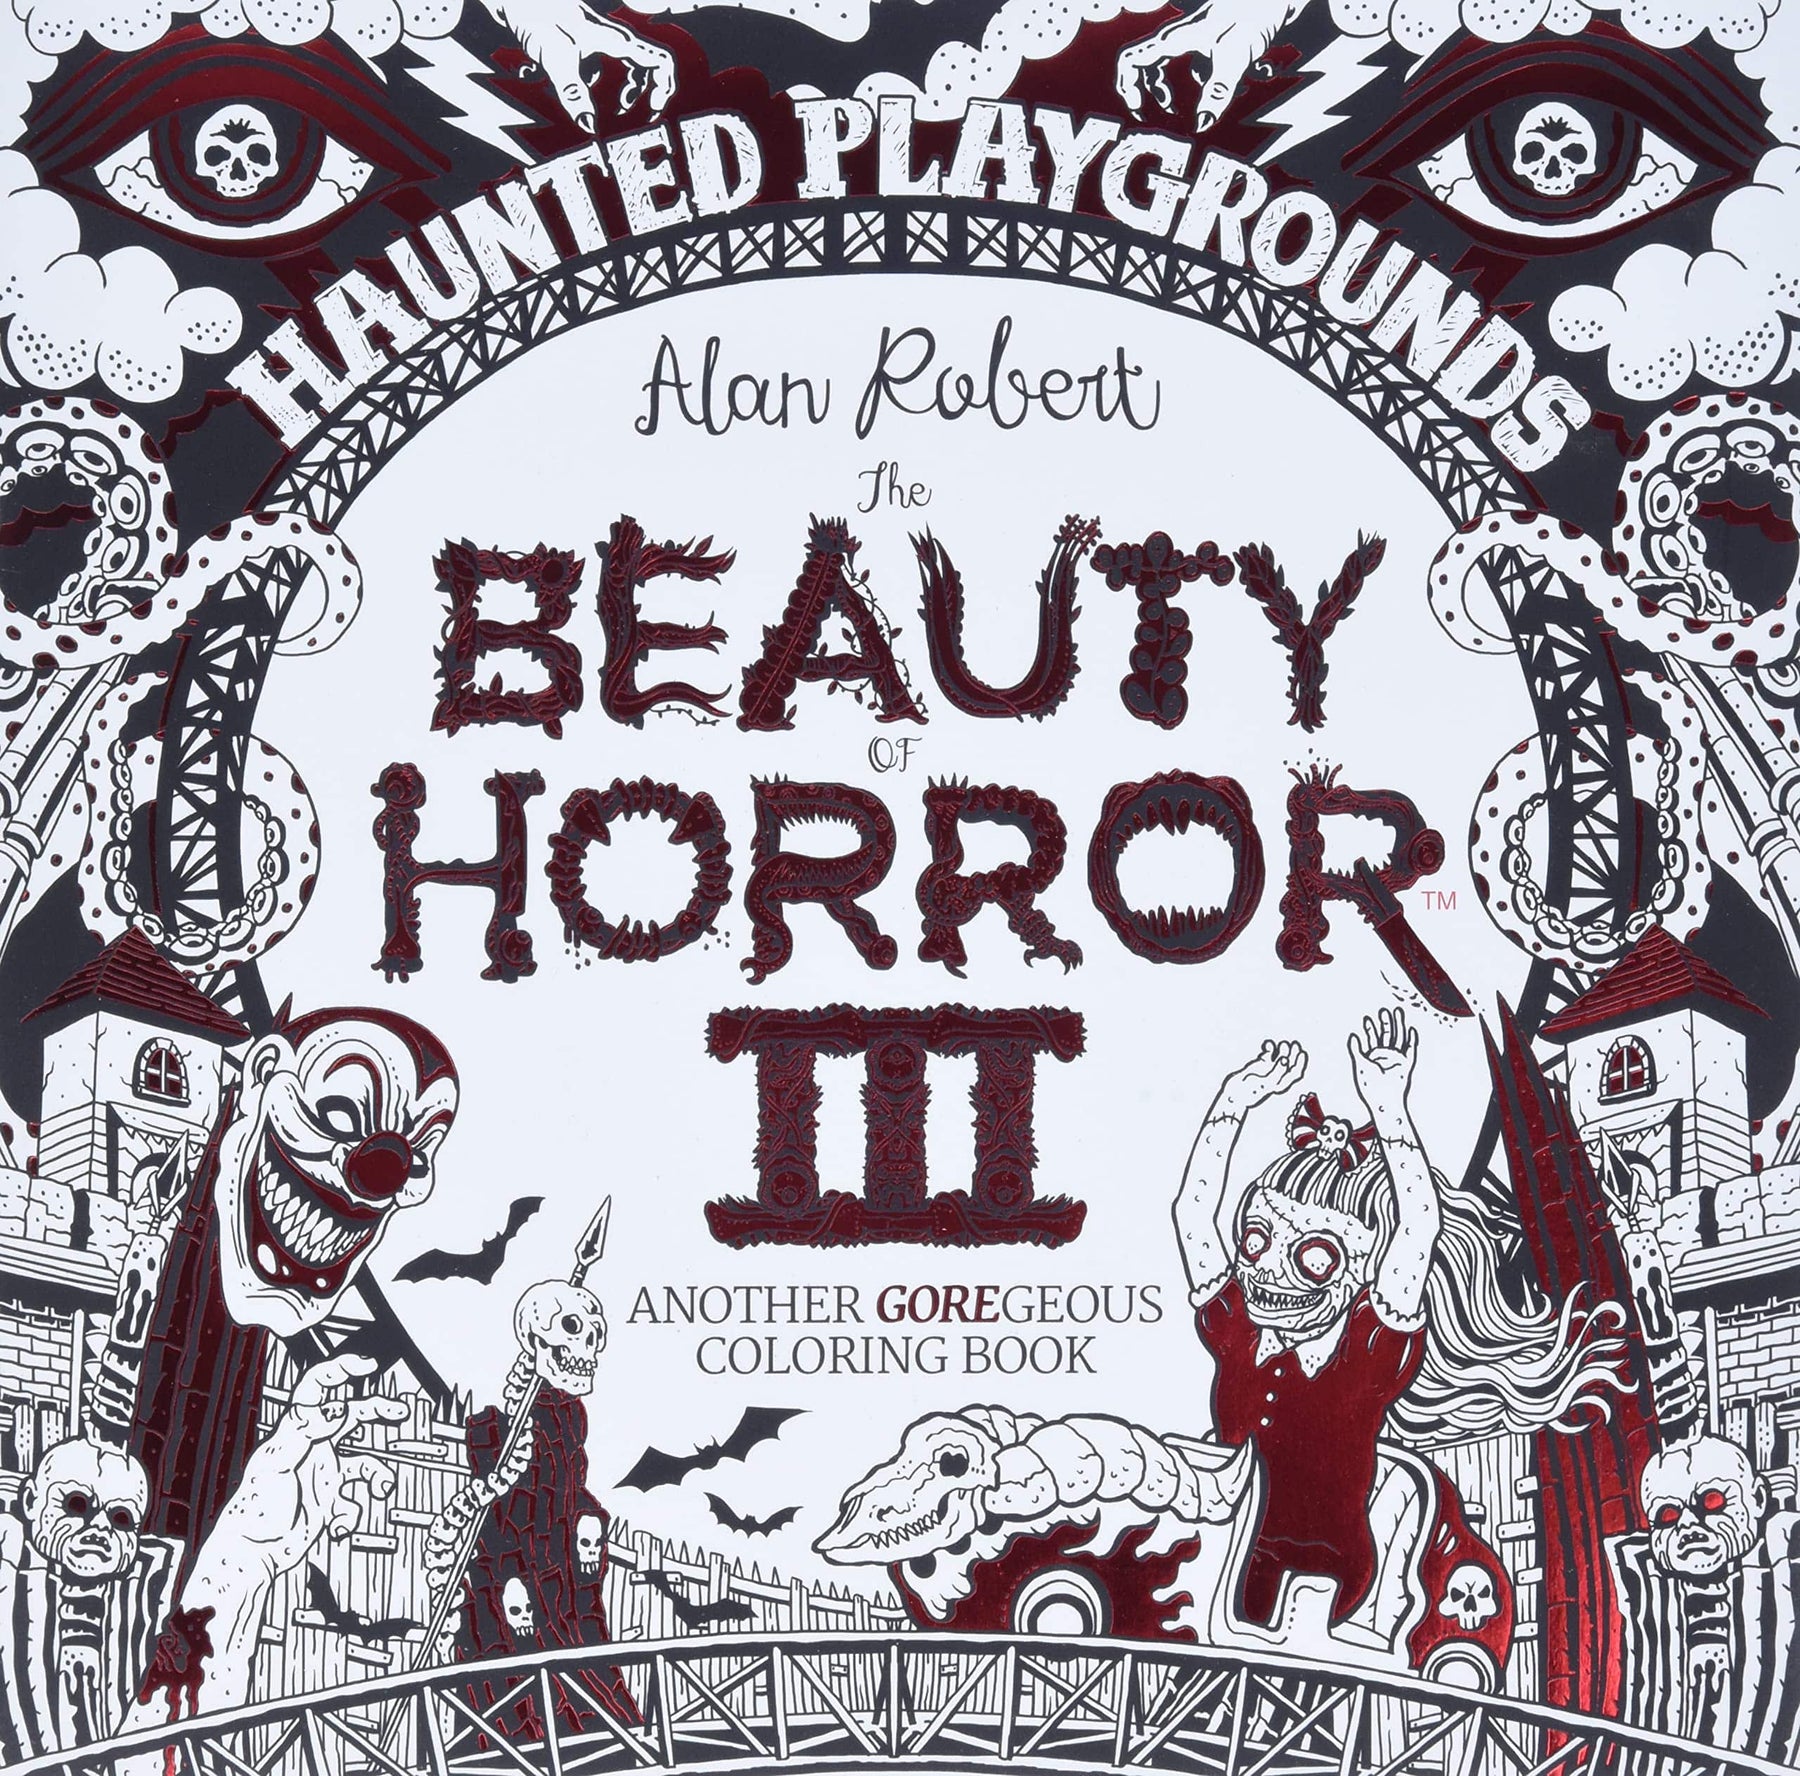 Beauty of Horror Vol. 3: Haunted Playground Coloring Book - Third Eye